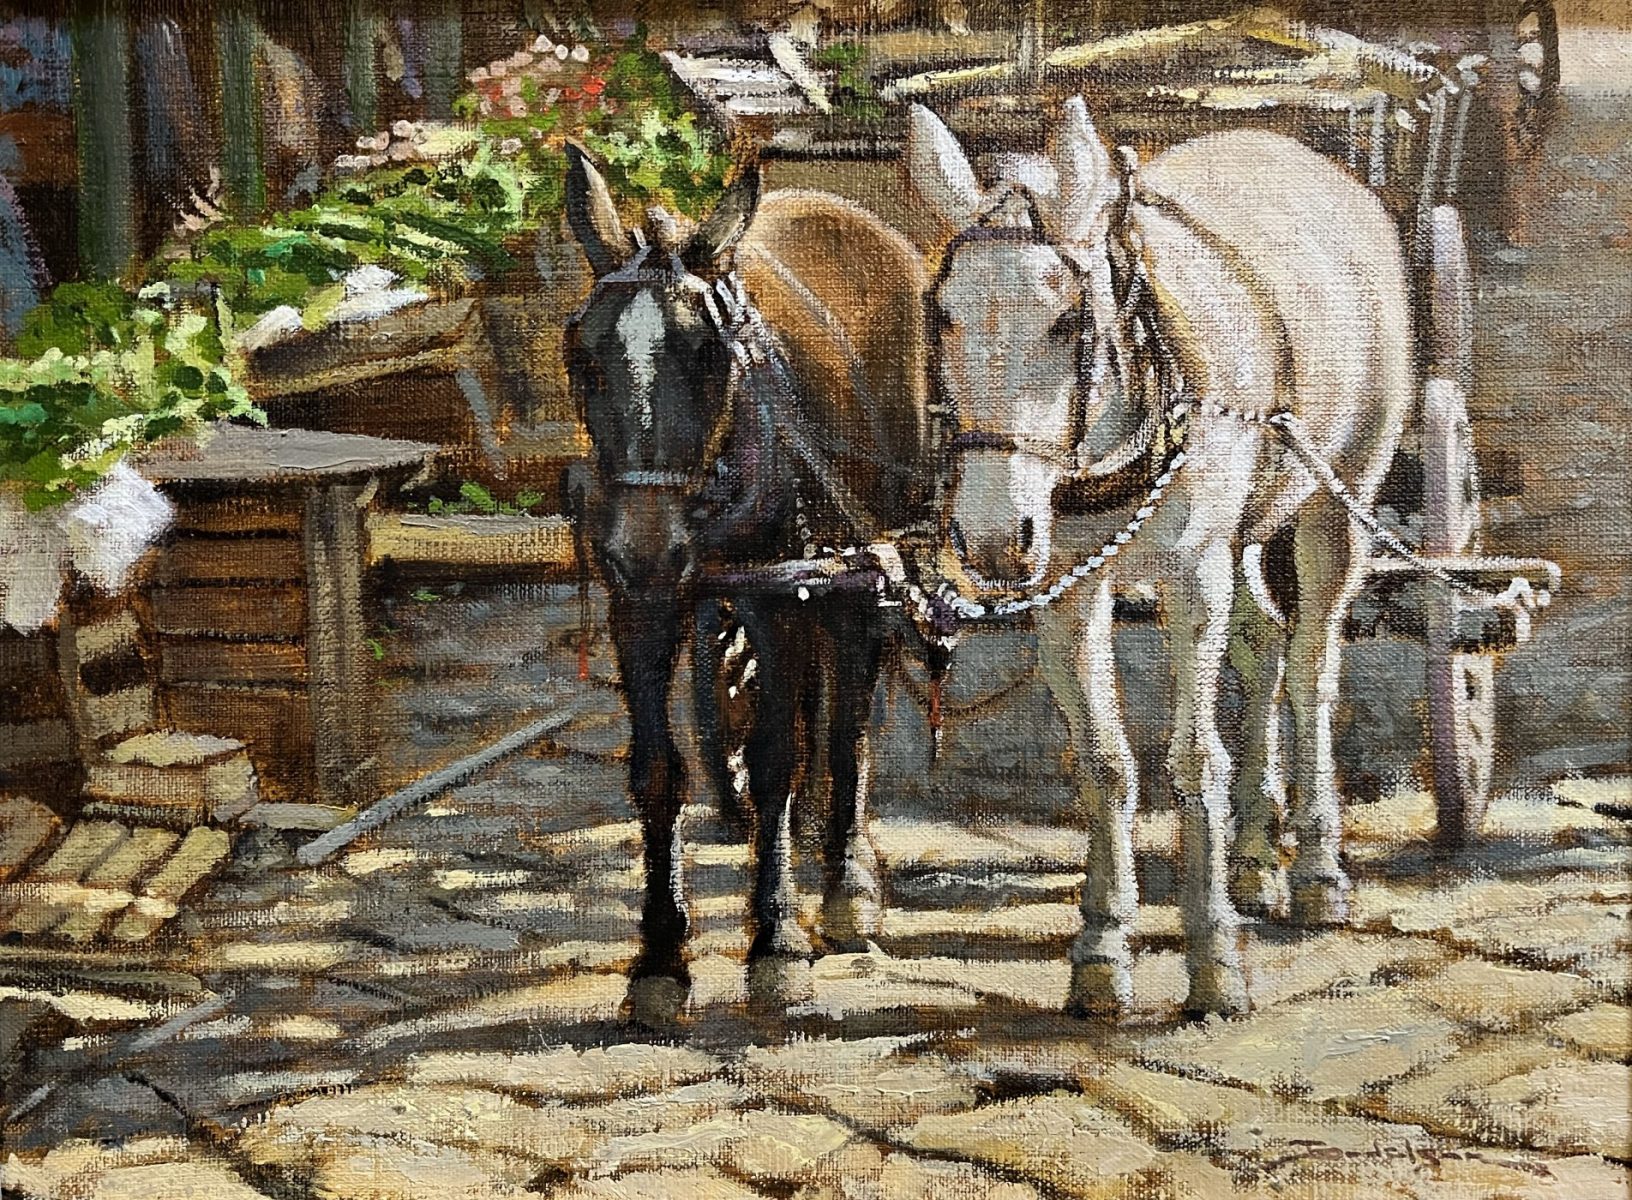 Marketplace scene with donkey's pulling cart by Dan Bodelson